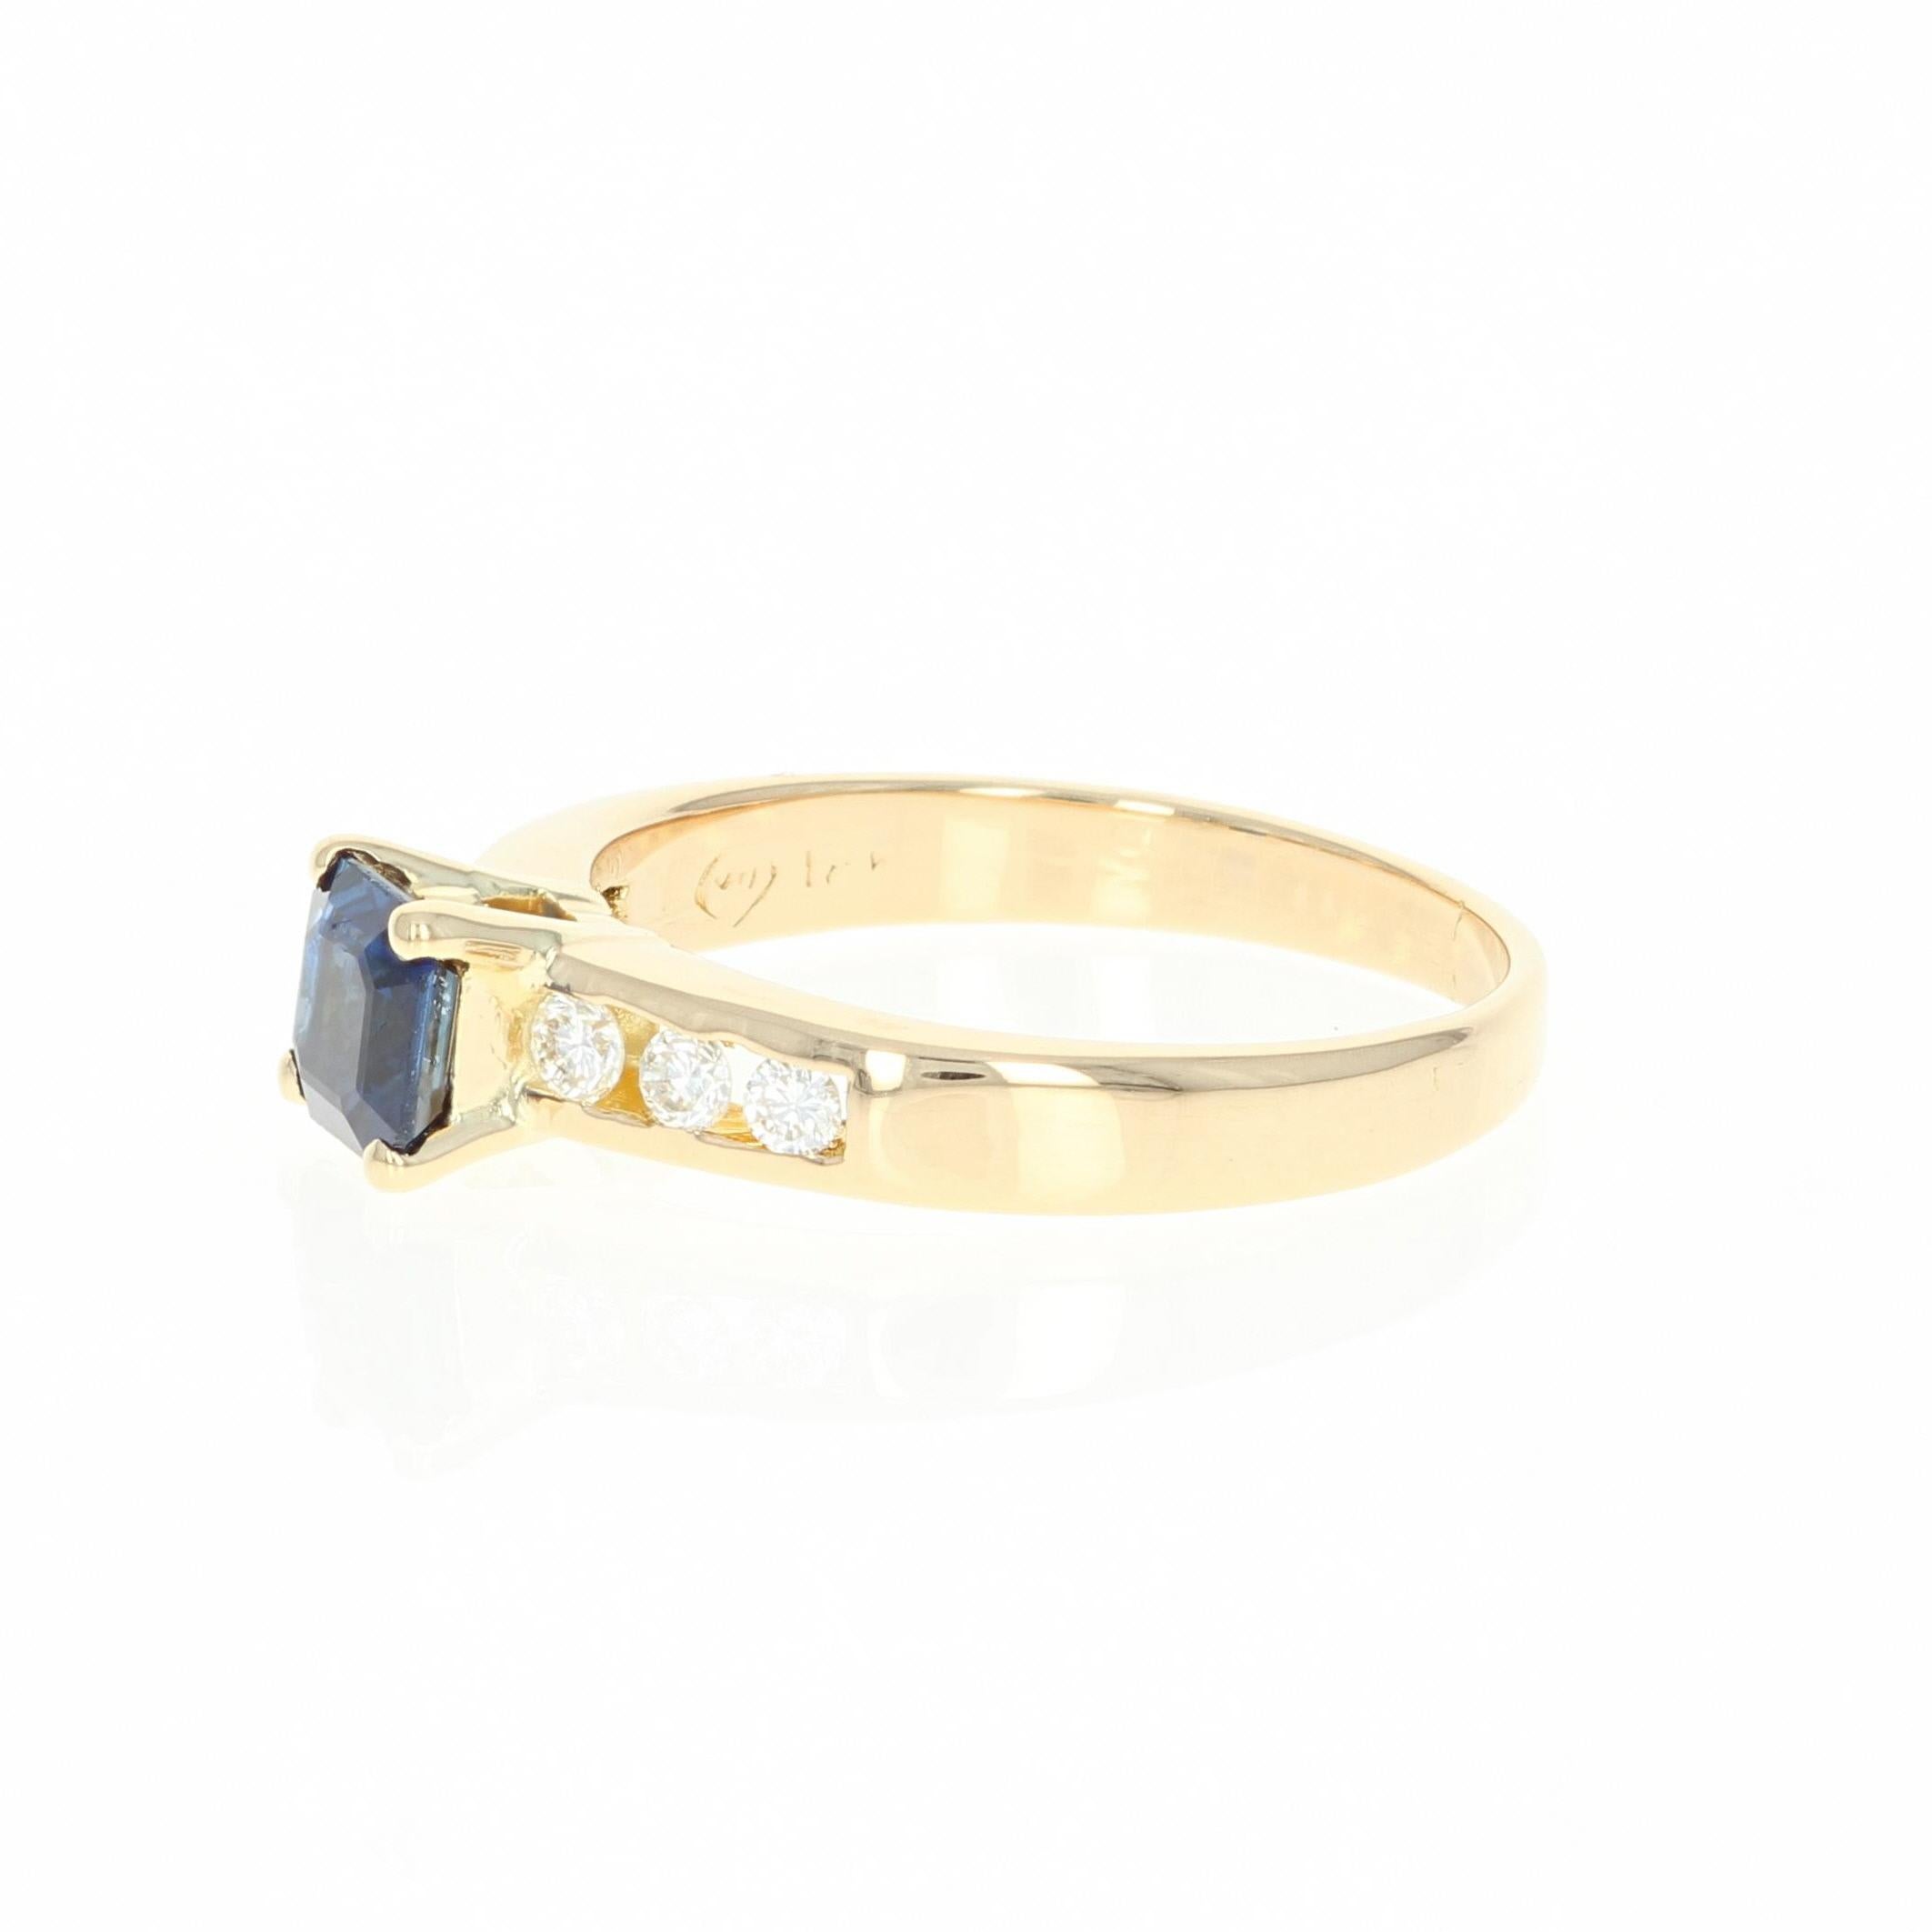 Color her world with this stunning gemstone ring! Luxuriously crafted in 18k yellow gold, this piece showcases a sapphire solitaire, which has a fantastic, top quality blue hue, that is elegantly accompanied by six channel-set icy white diamond